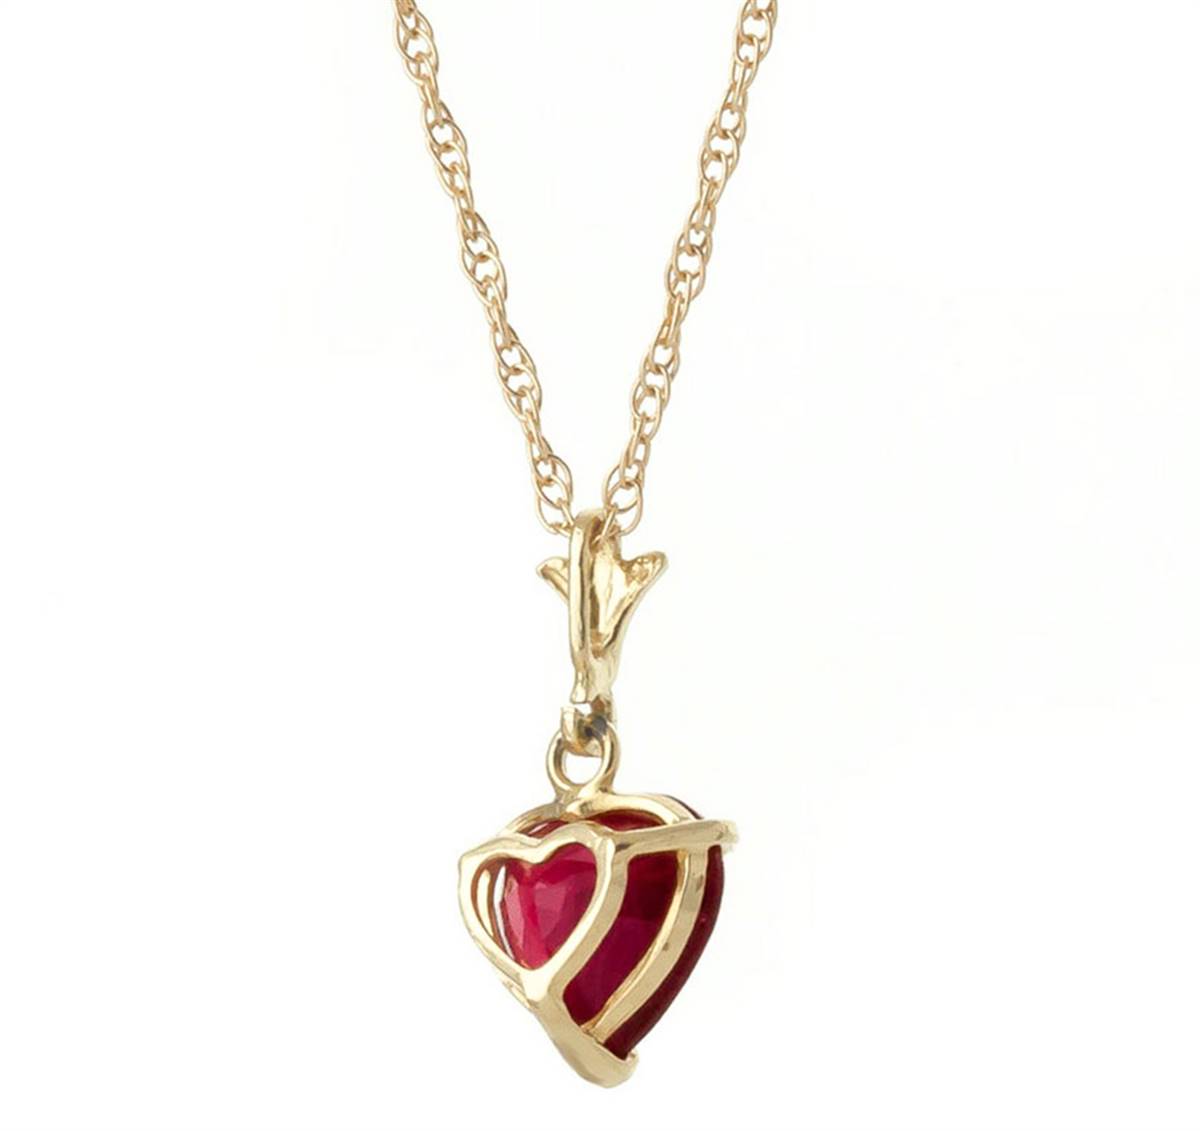 1.45 Carat 14K Solid Yellow Gold Necklace Natural Heart Ruby